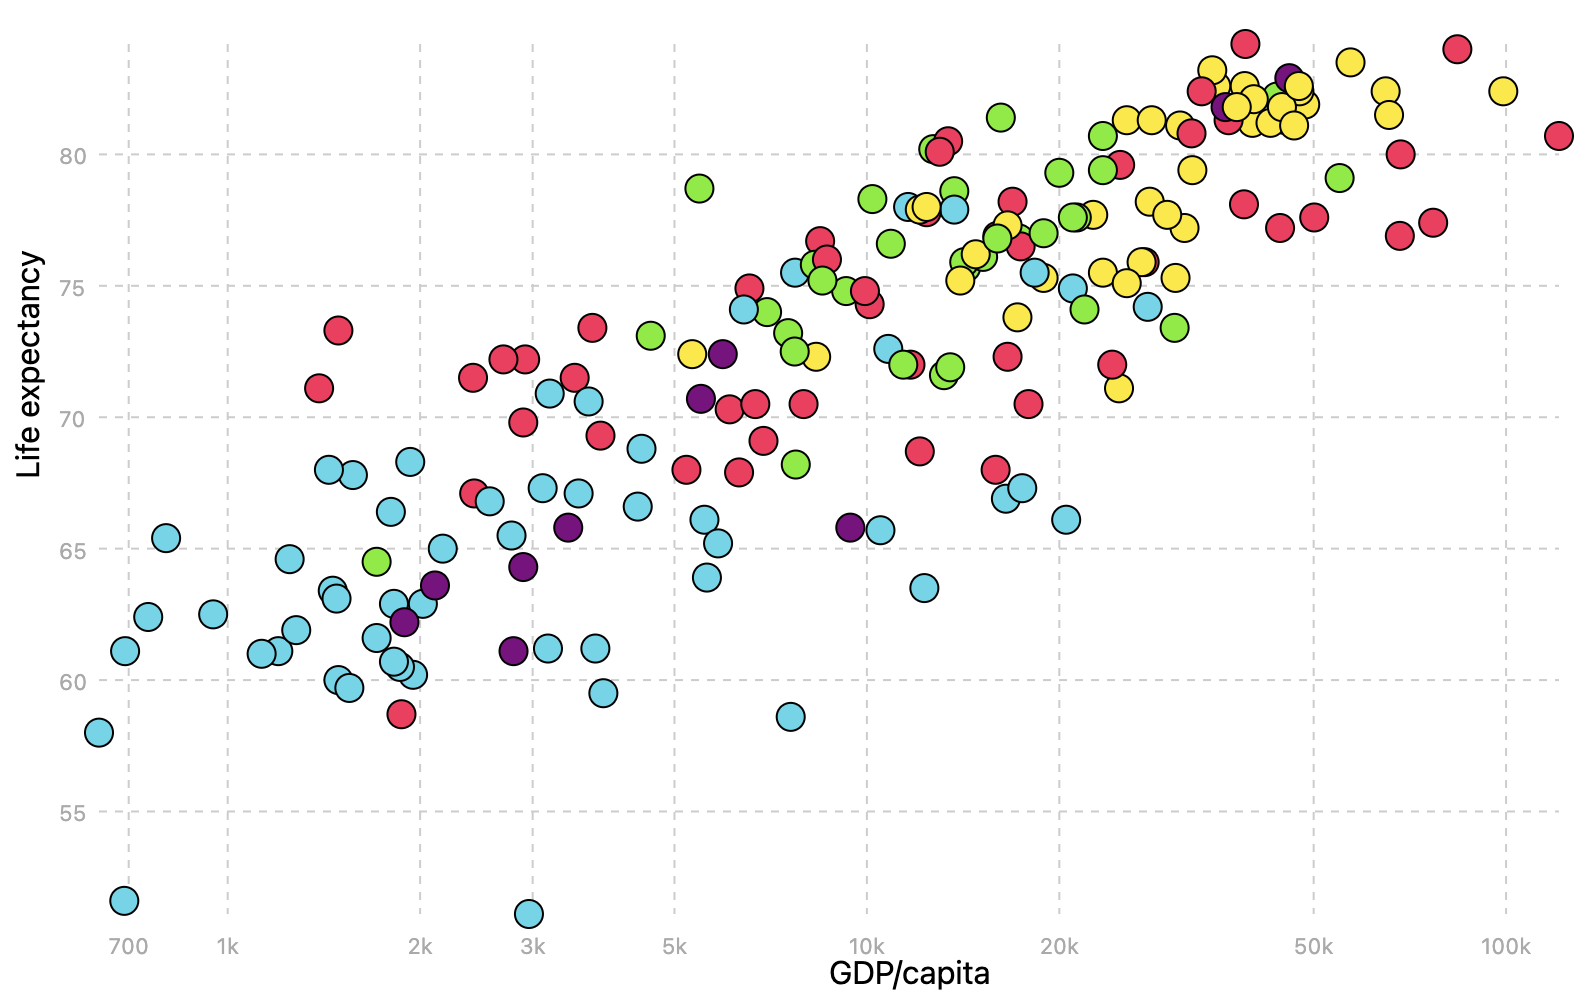 The same scatter plot as above, but with the dots coloured according to the region its country belongs to